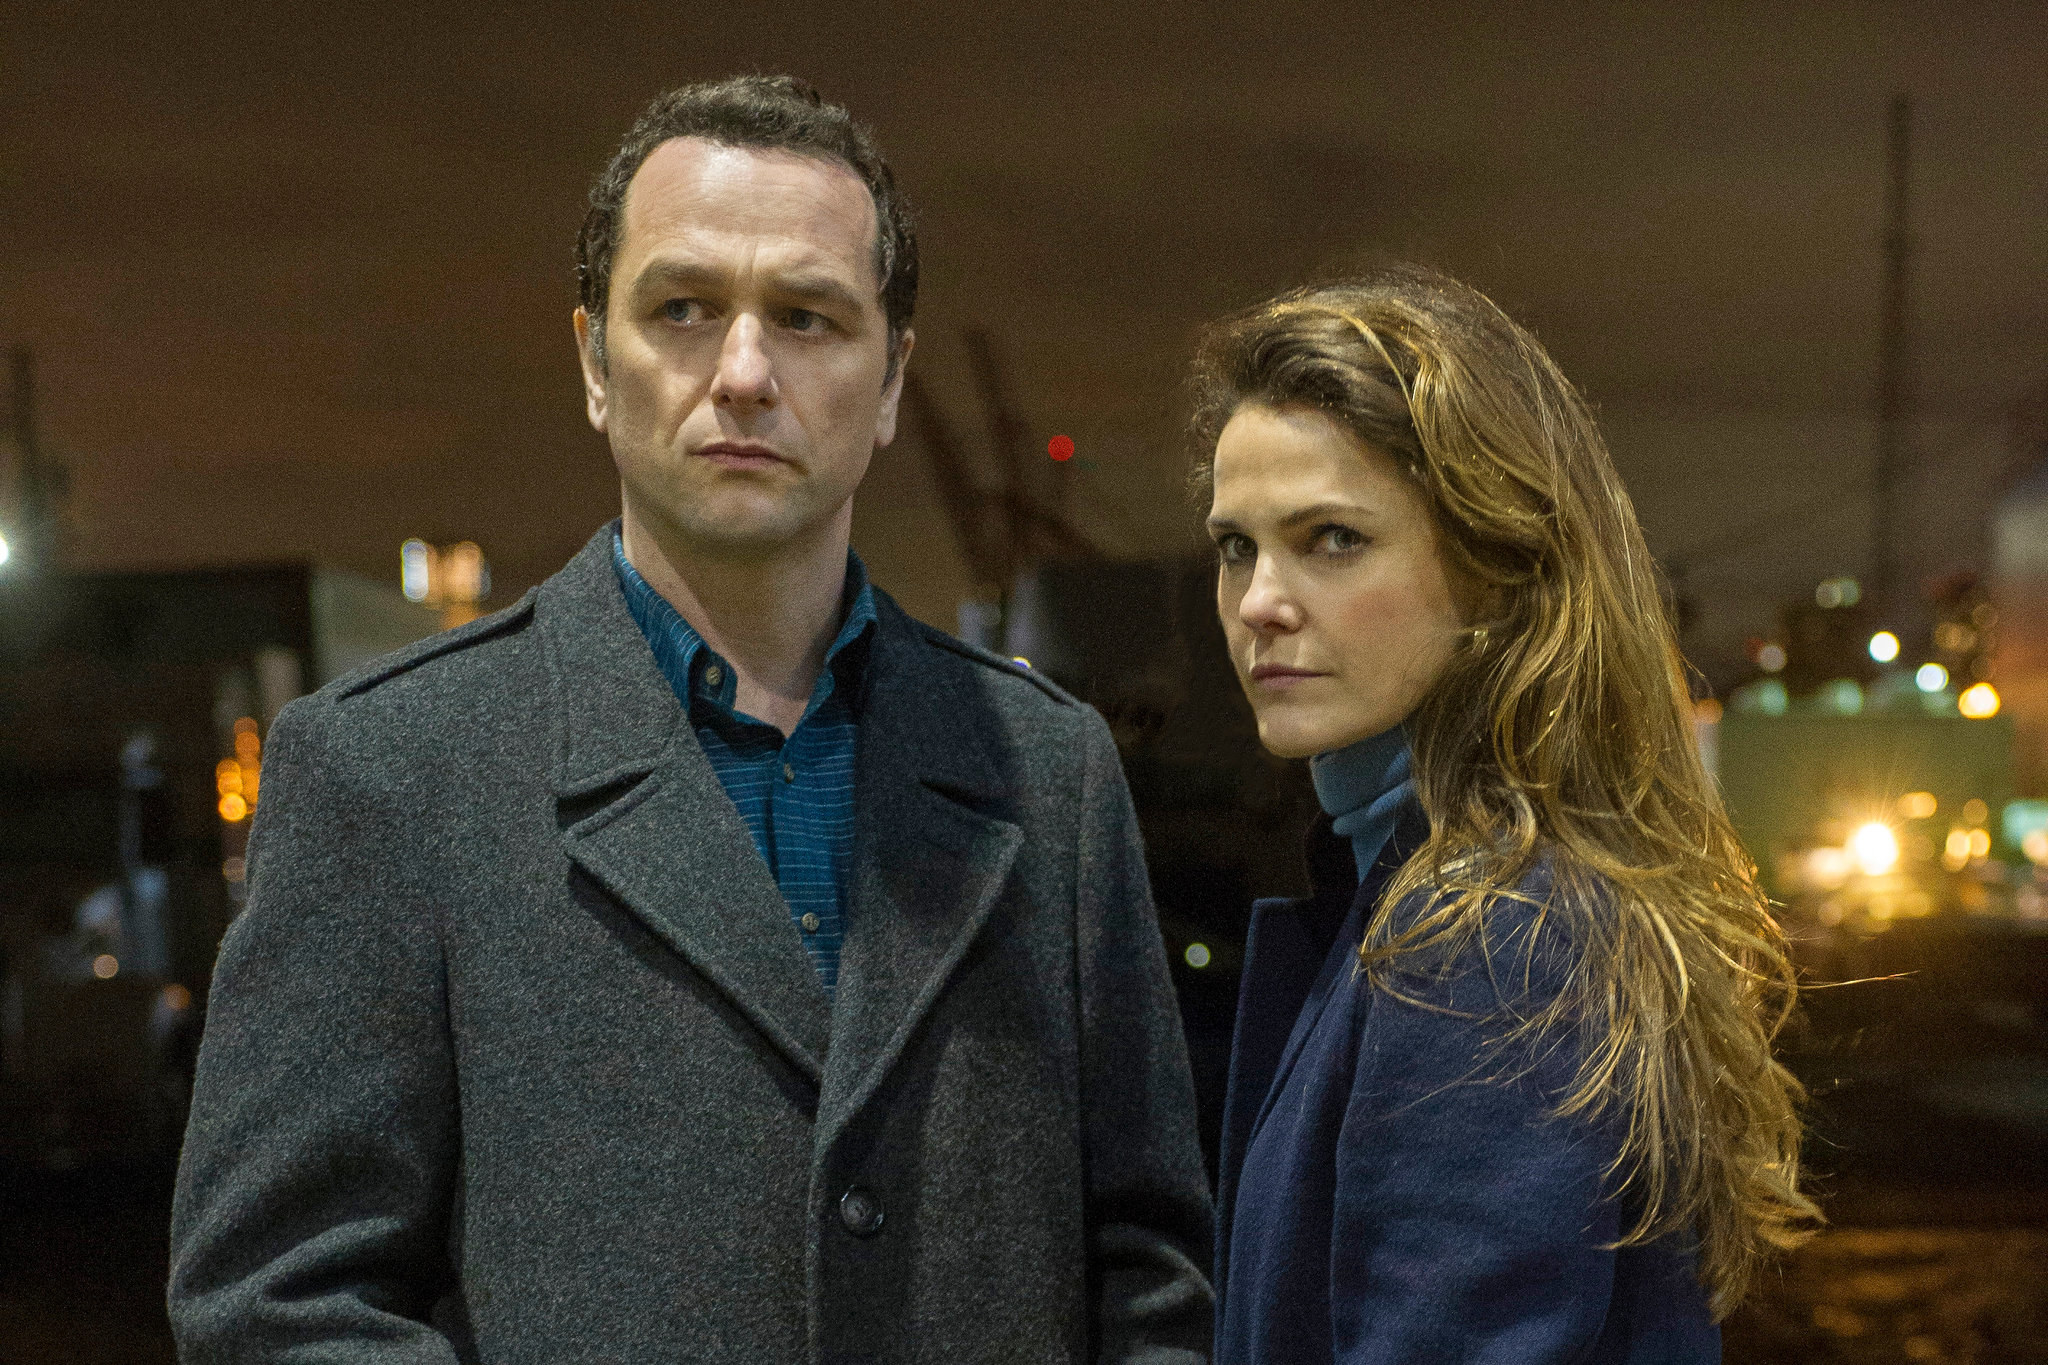 Matthew Rhys and Keri Russell as Philip and Elizabeth Jennings stood together at a dock during the night in &quot;The Americans&quot;